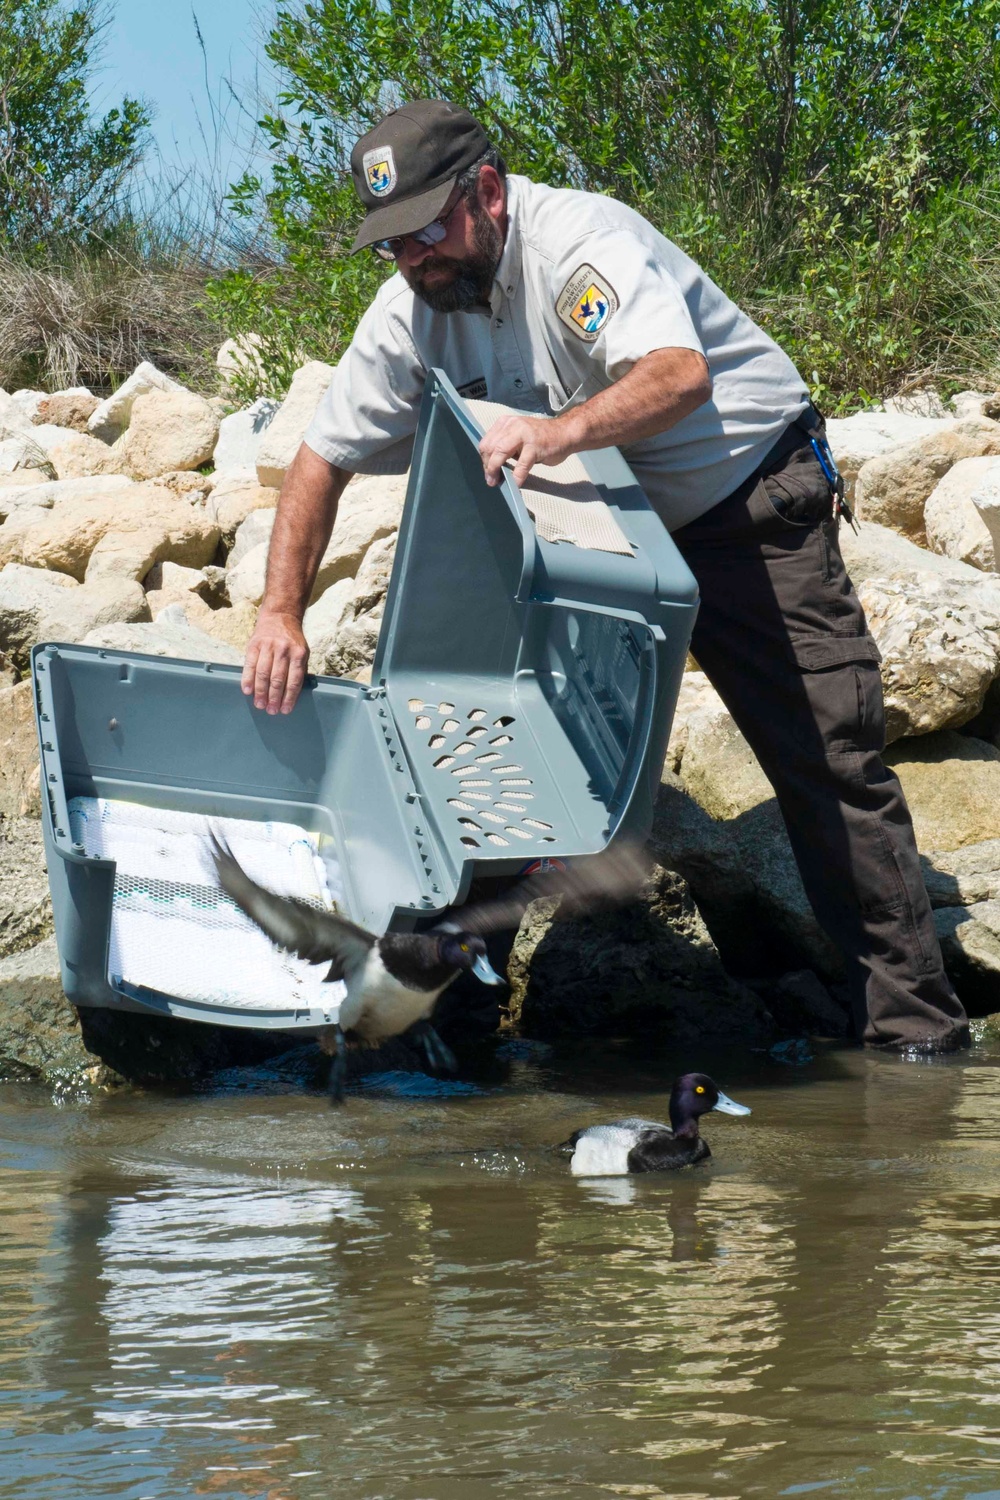 Unified Command releases 3 ducks at wildlife refuge